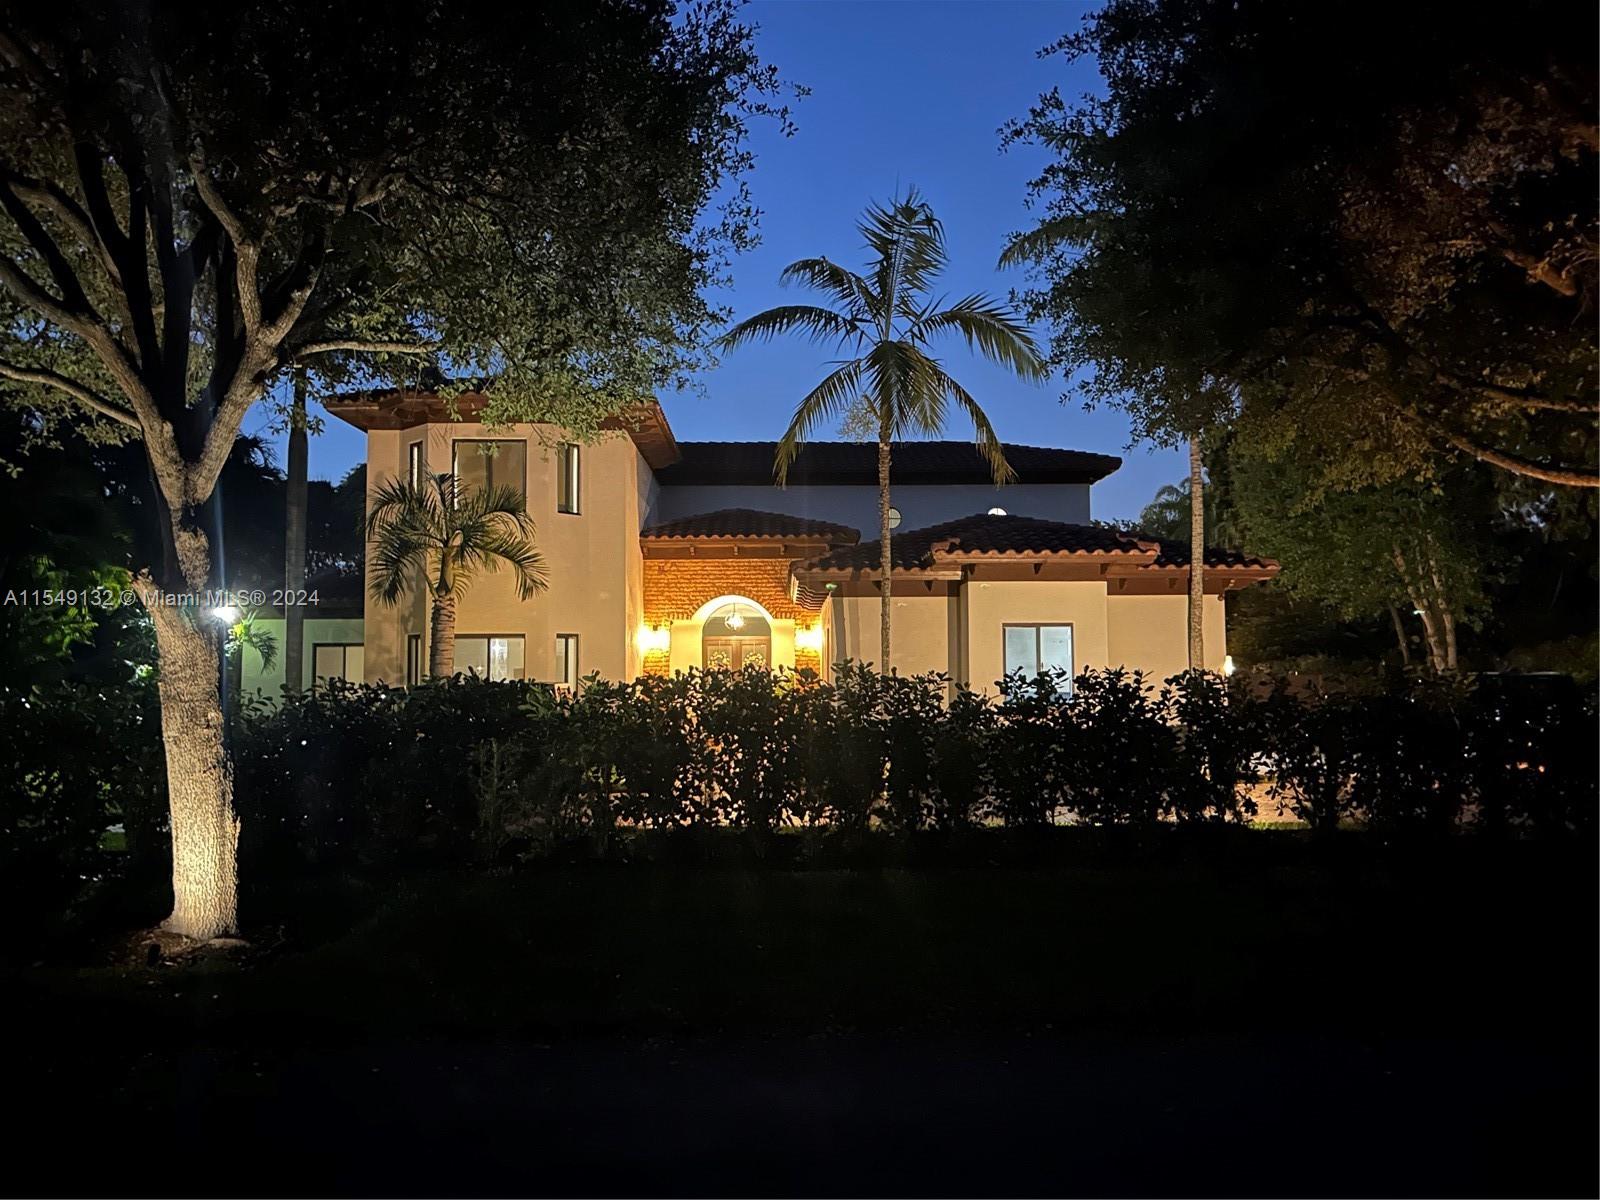 8675 Sw 122nd St St, Miami, Broward County, Florida - 5 Bedrooms  
5 Bathrooms - 